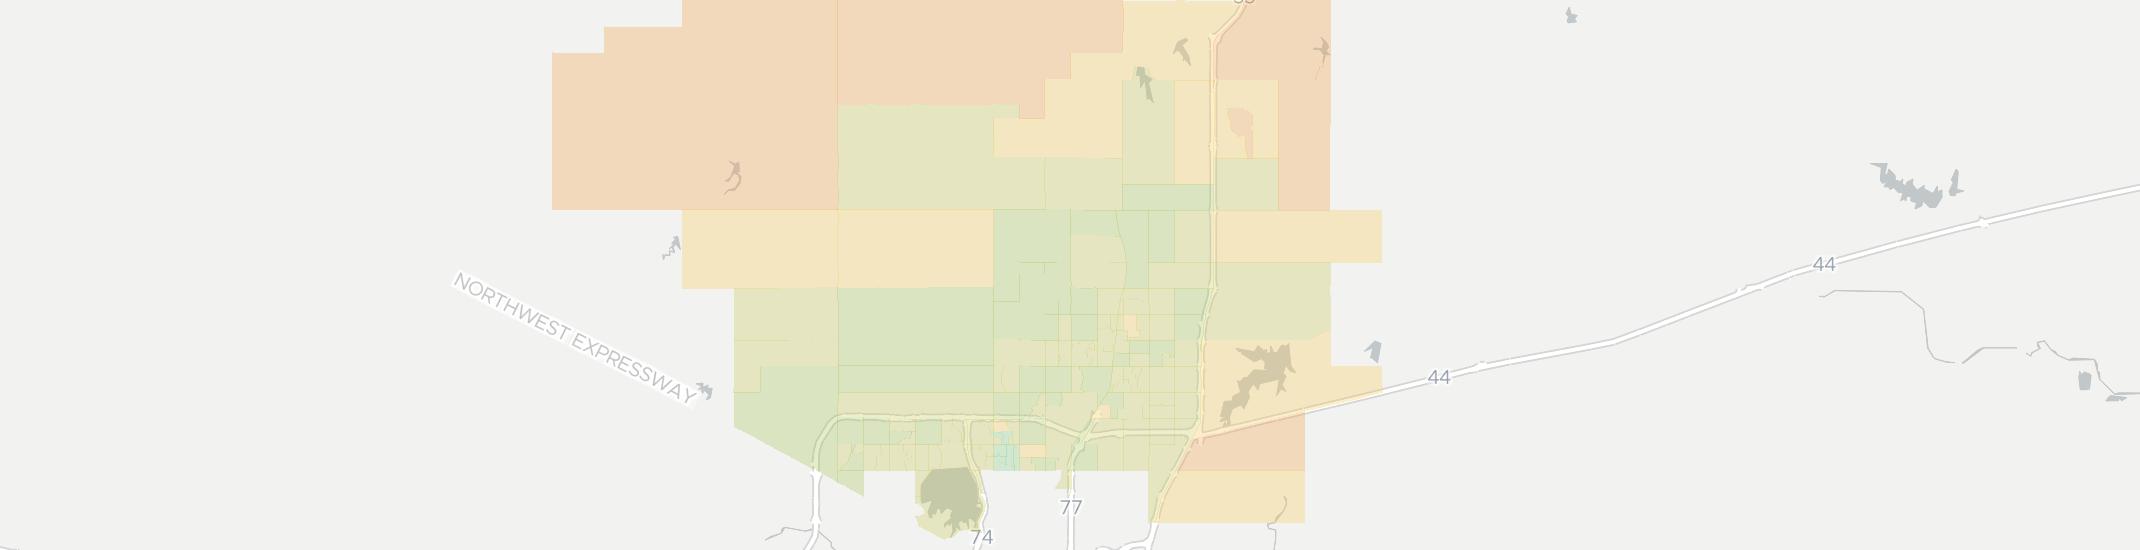 Edmond Internet Competition Map. Click for interactive map.